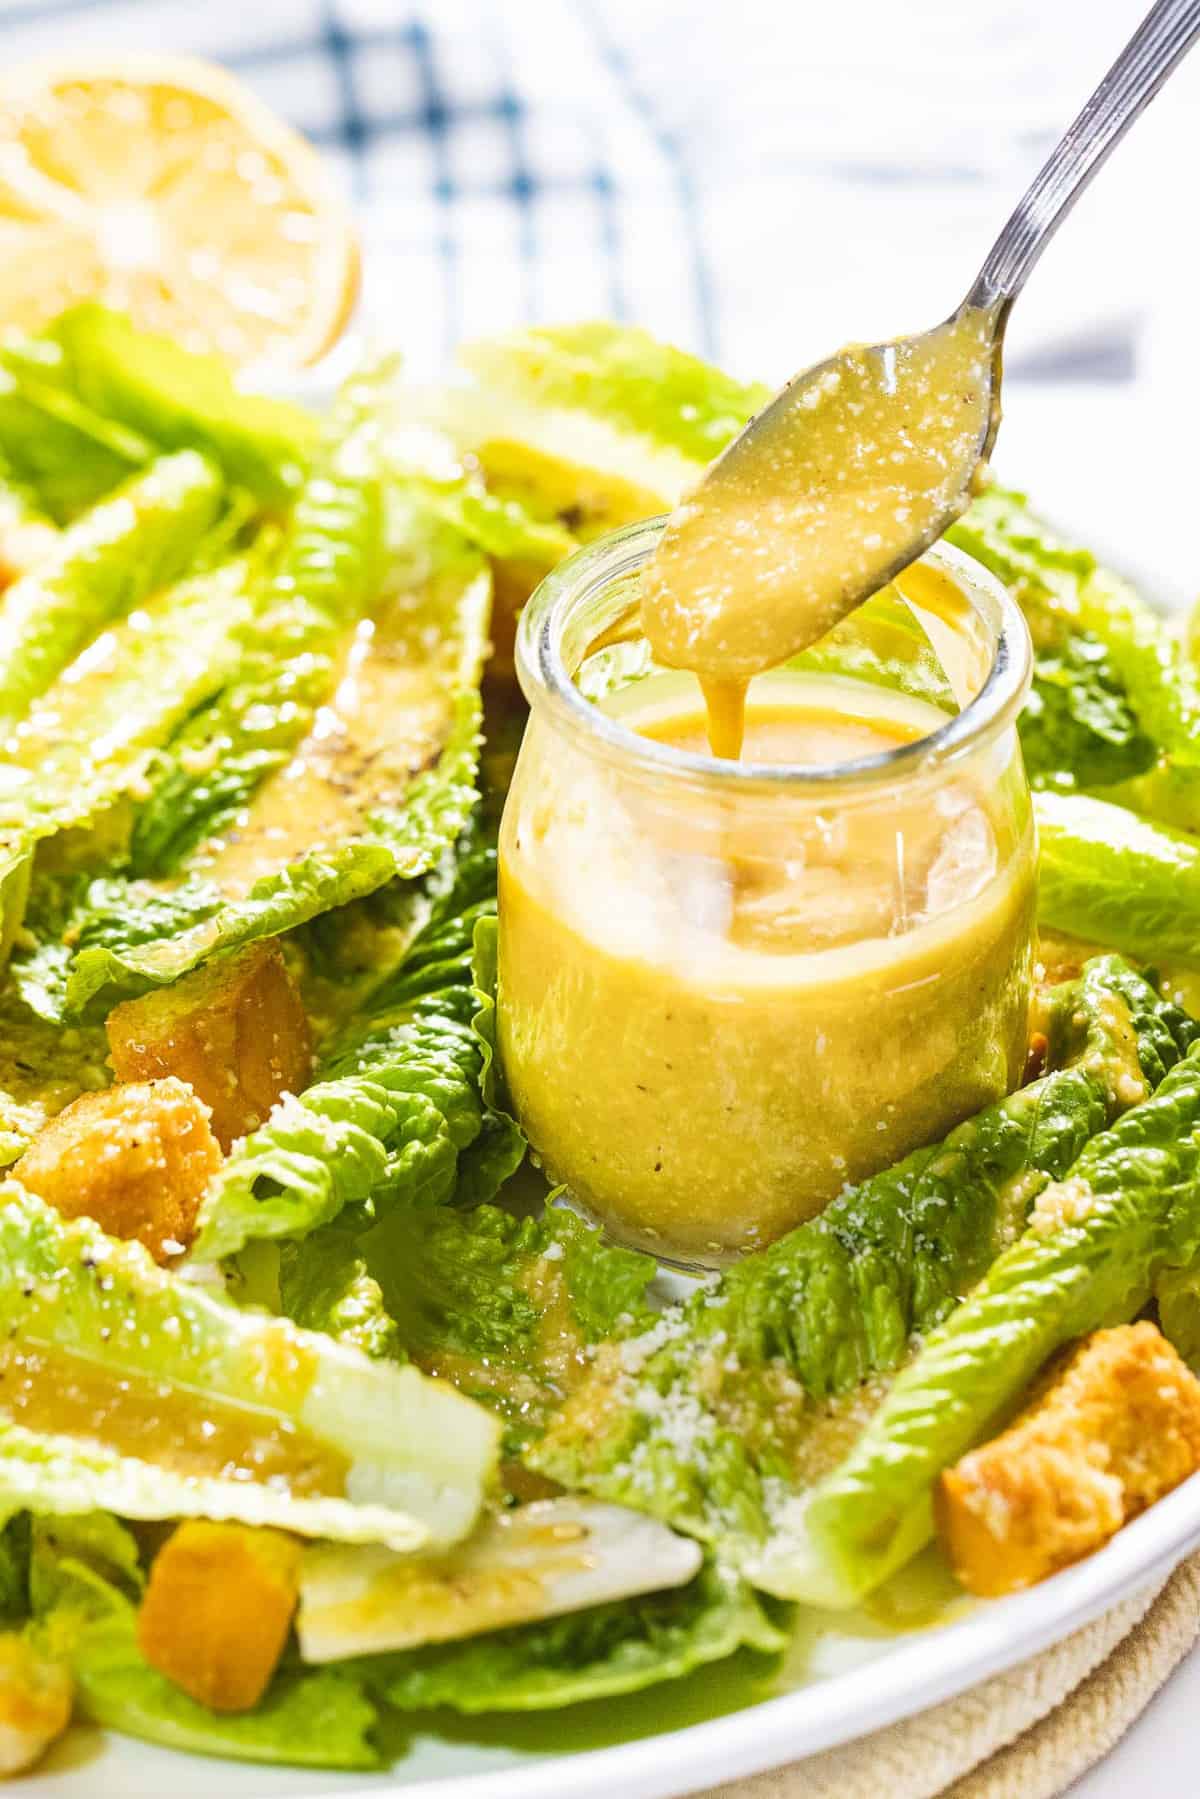 Homemade Caesar salad dressing dripping off a spoon on a plate of romaine lettuce.